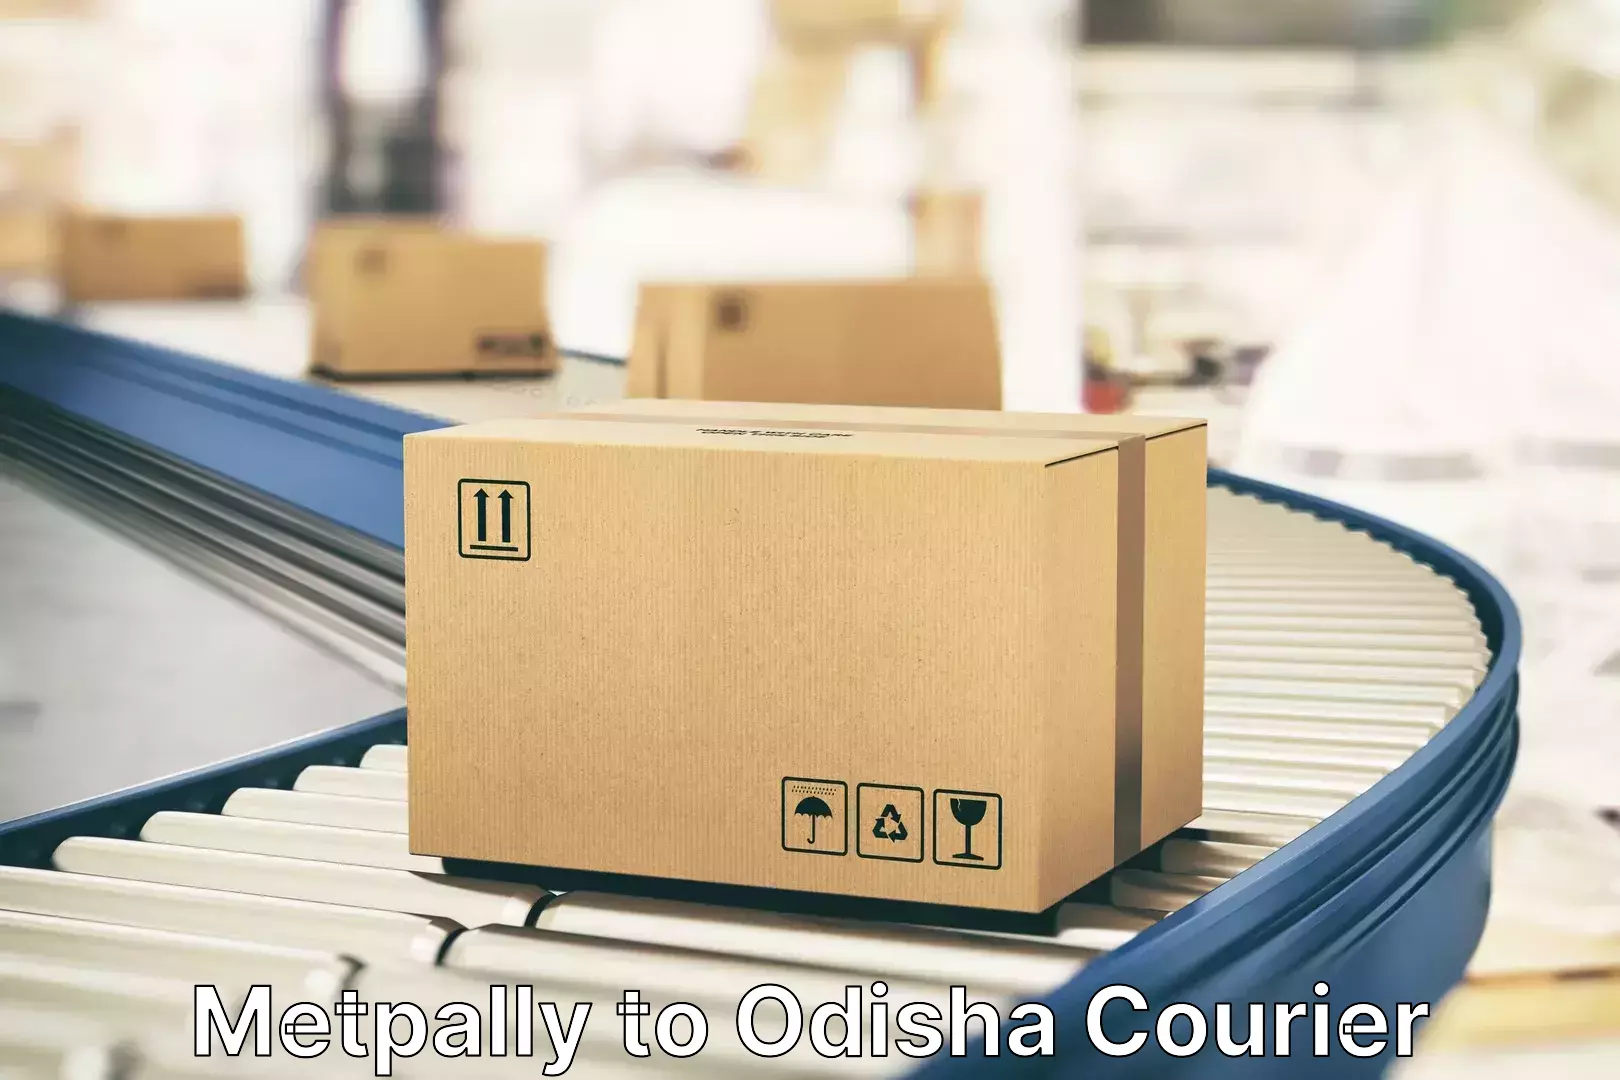 Online luggage shipping booking Metpally to Odisha